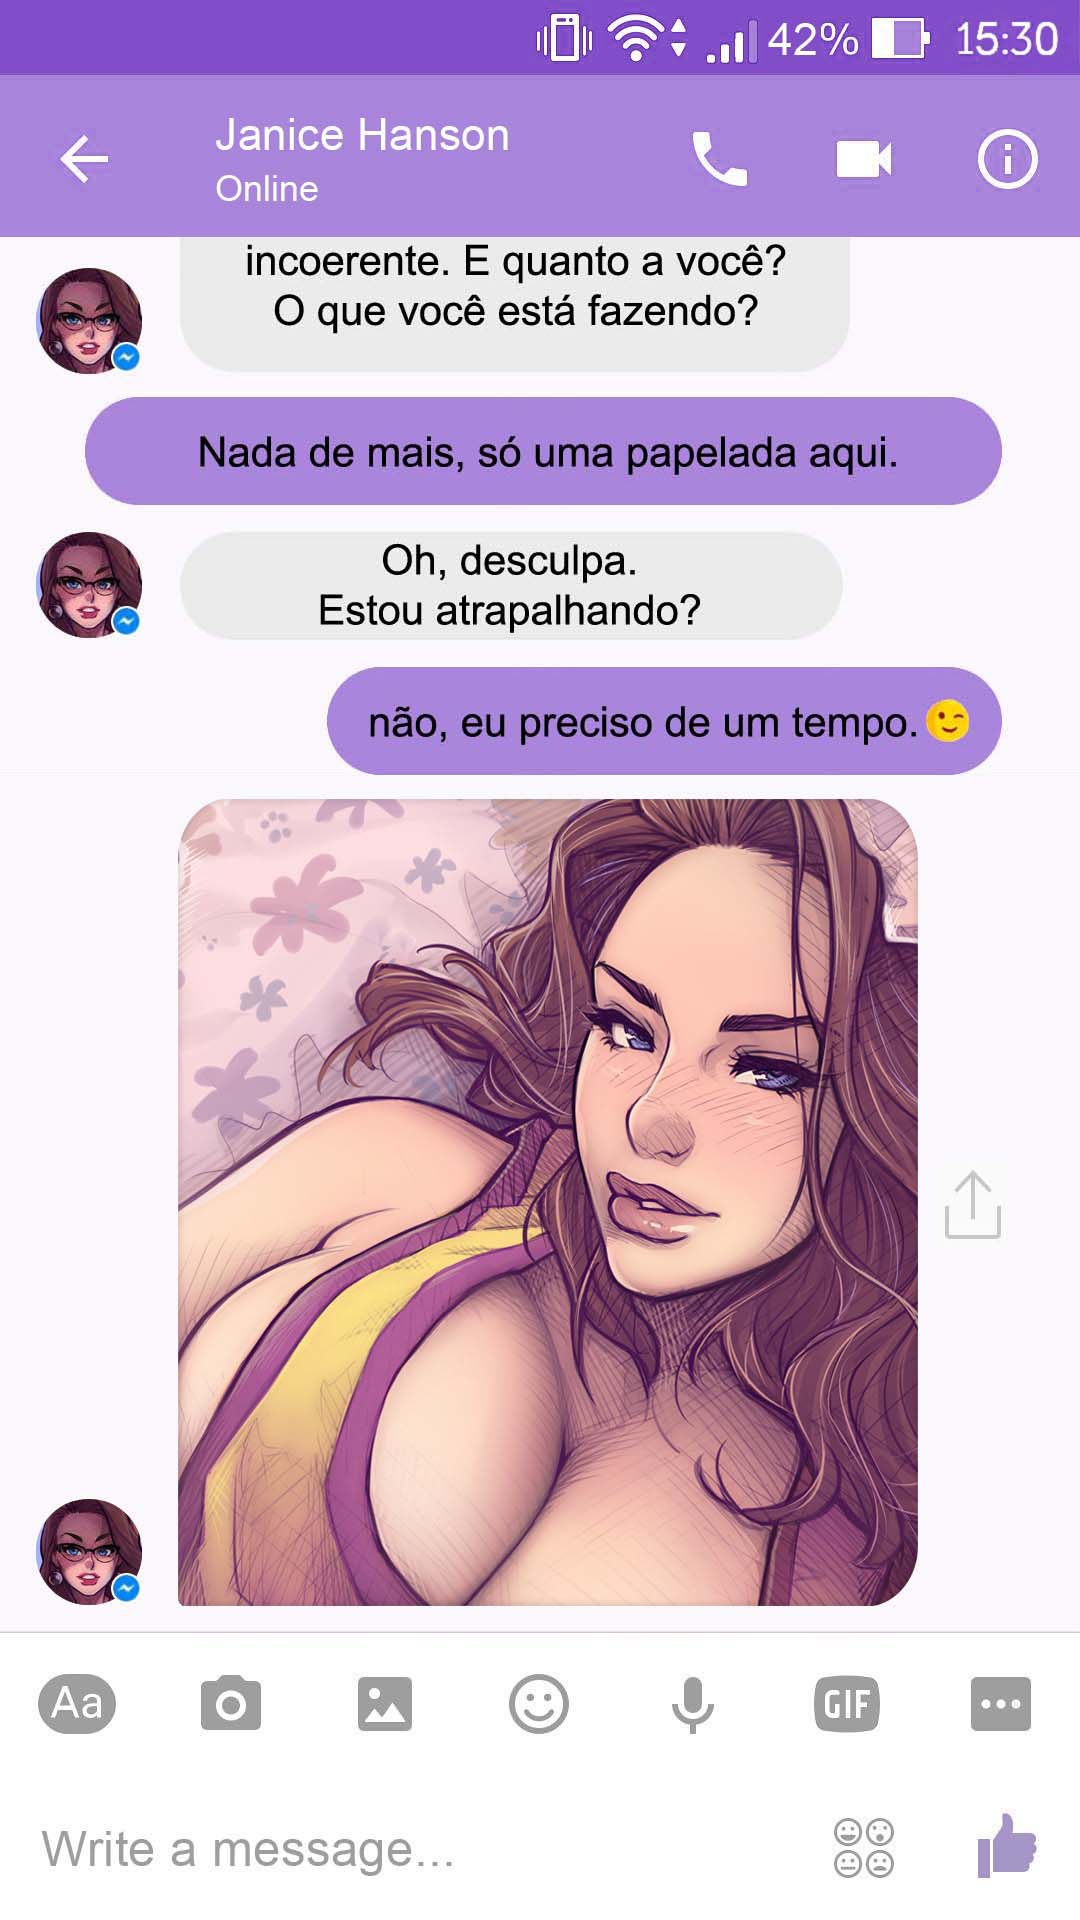 Chat With Janice - Trocando mensagens picantes